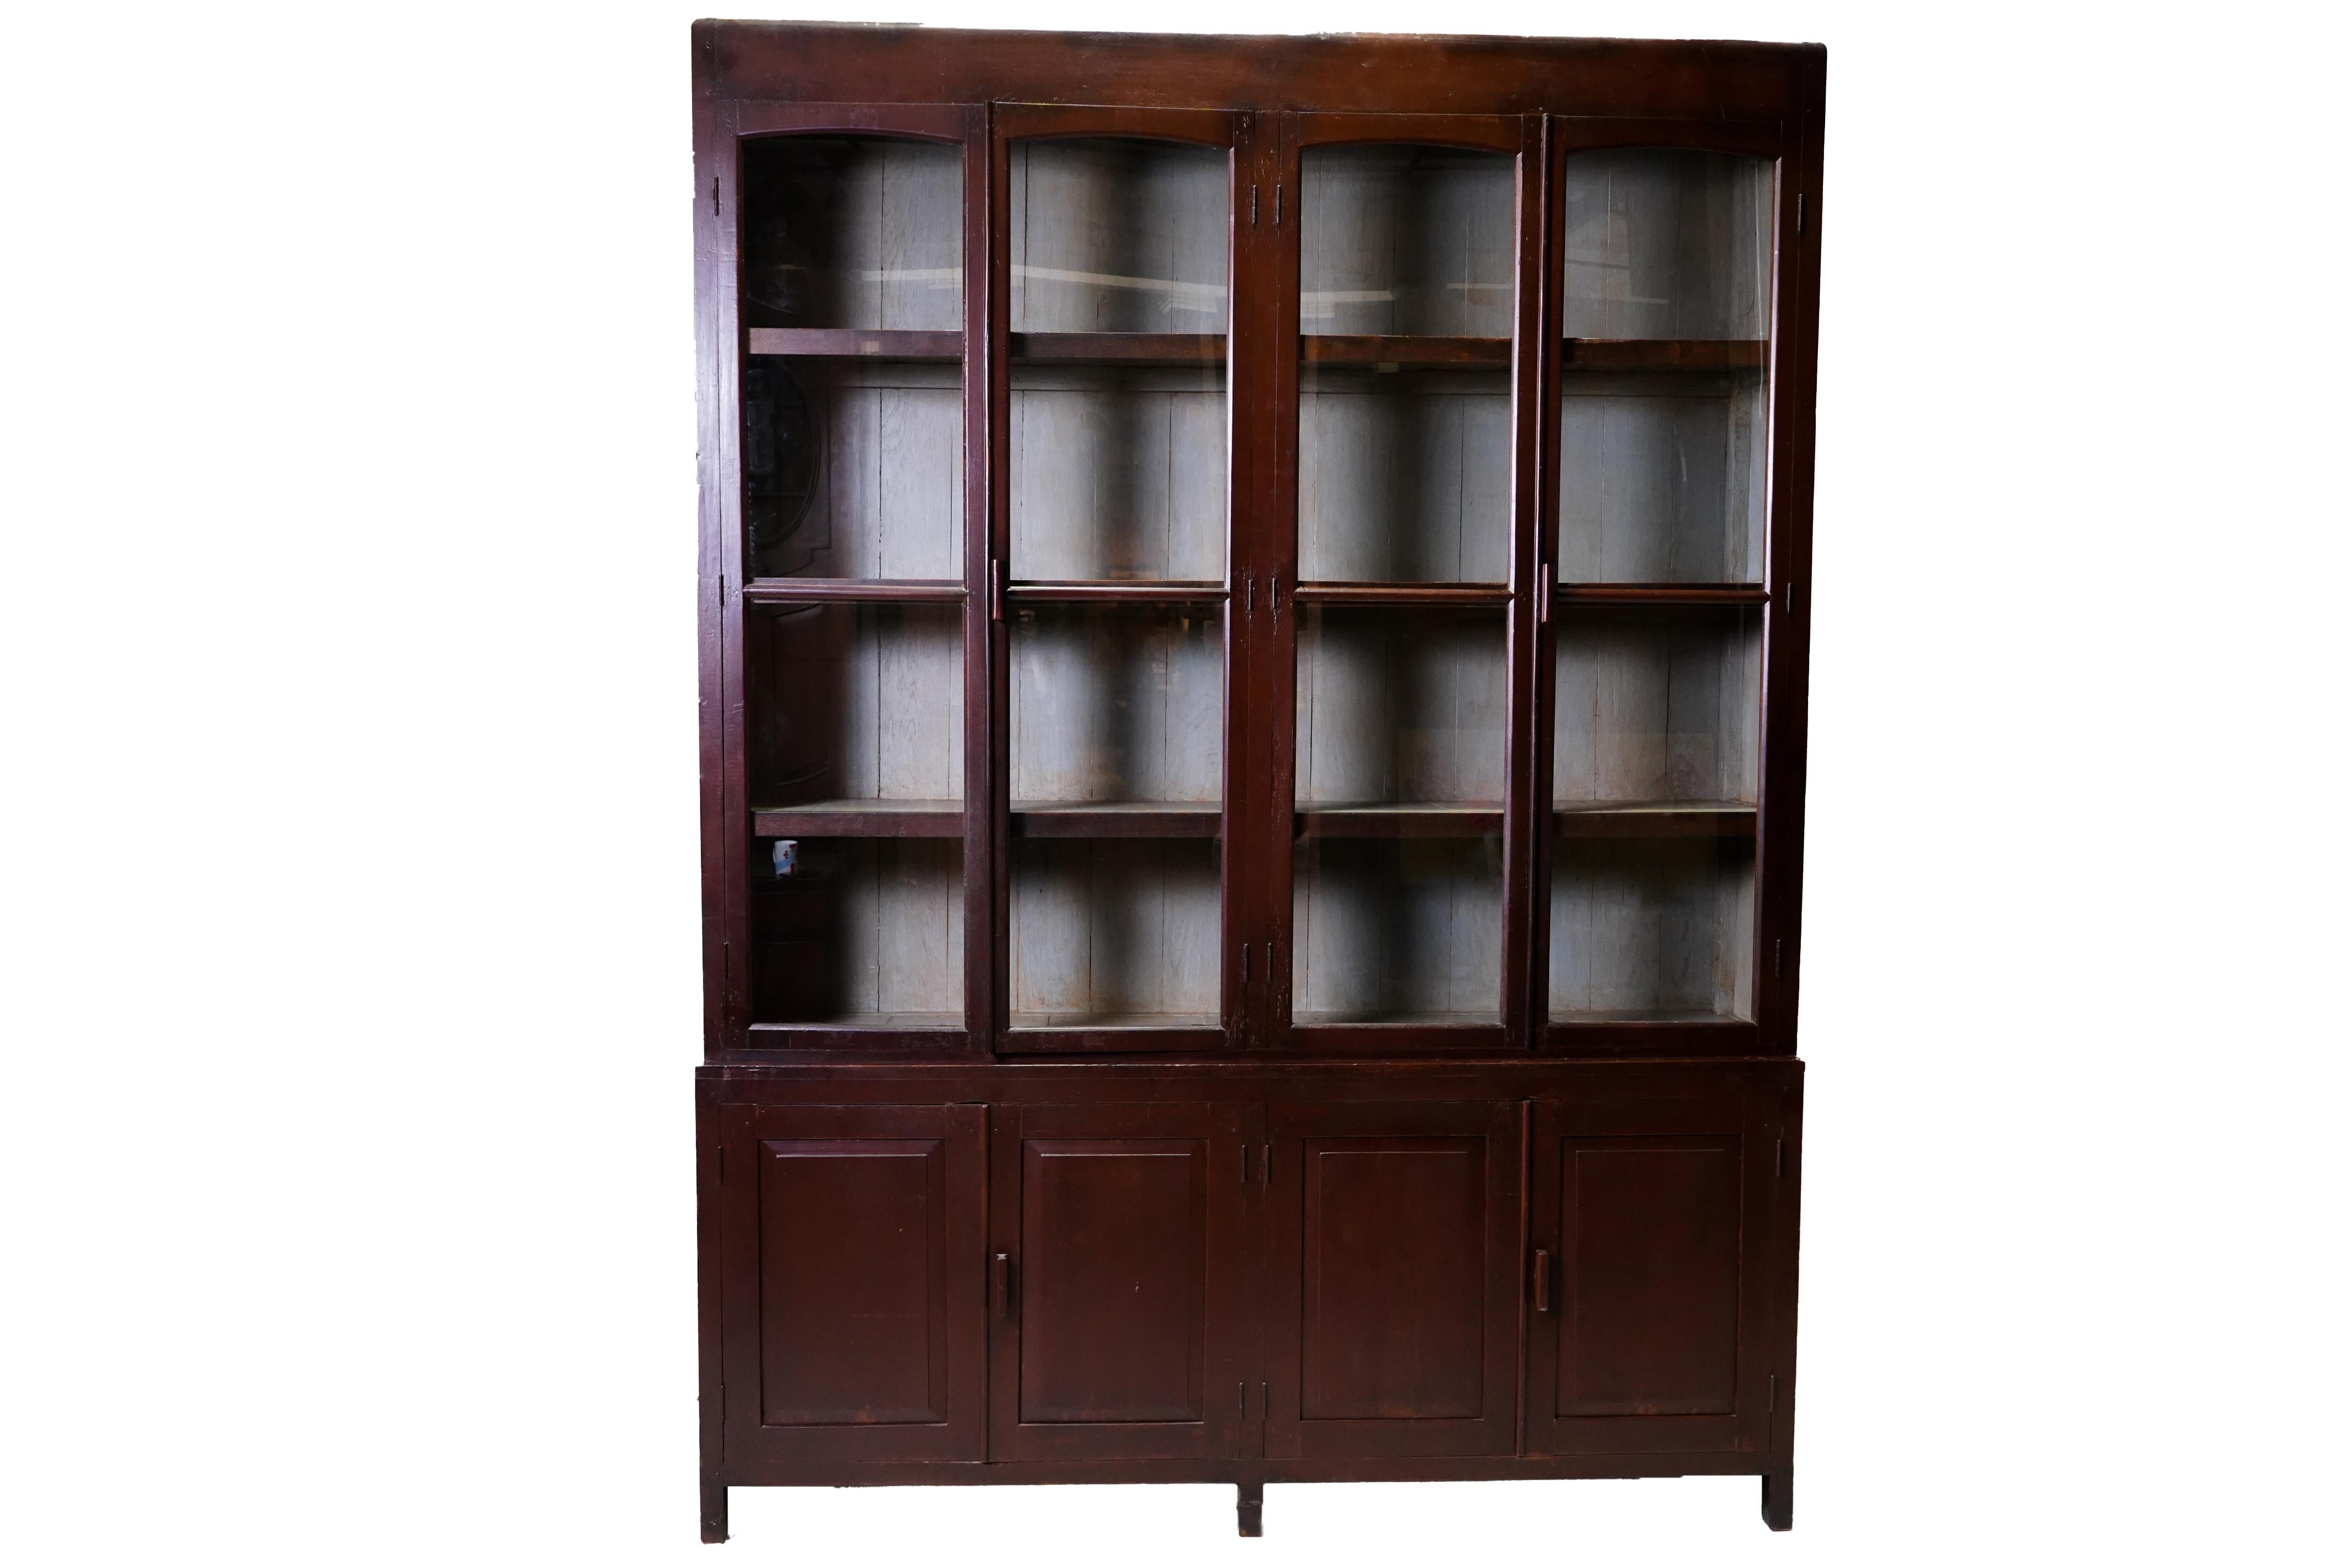 This impressively-scaled book cabinet was made from solid Teak wood and dates to the 1940's. During the late British empire in India and Burma much furniture was made in the Art Deco Style using local hardwoods and native furniture builders. Art